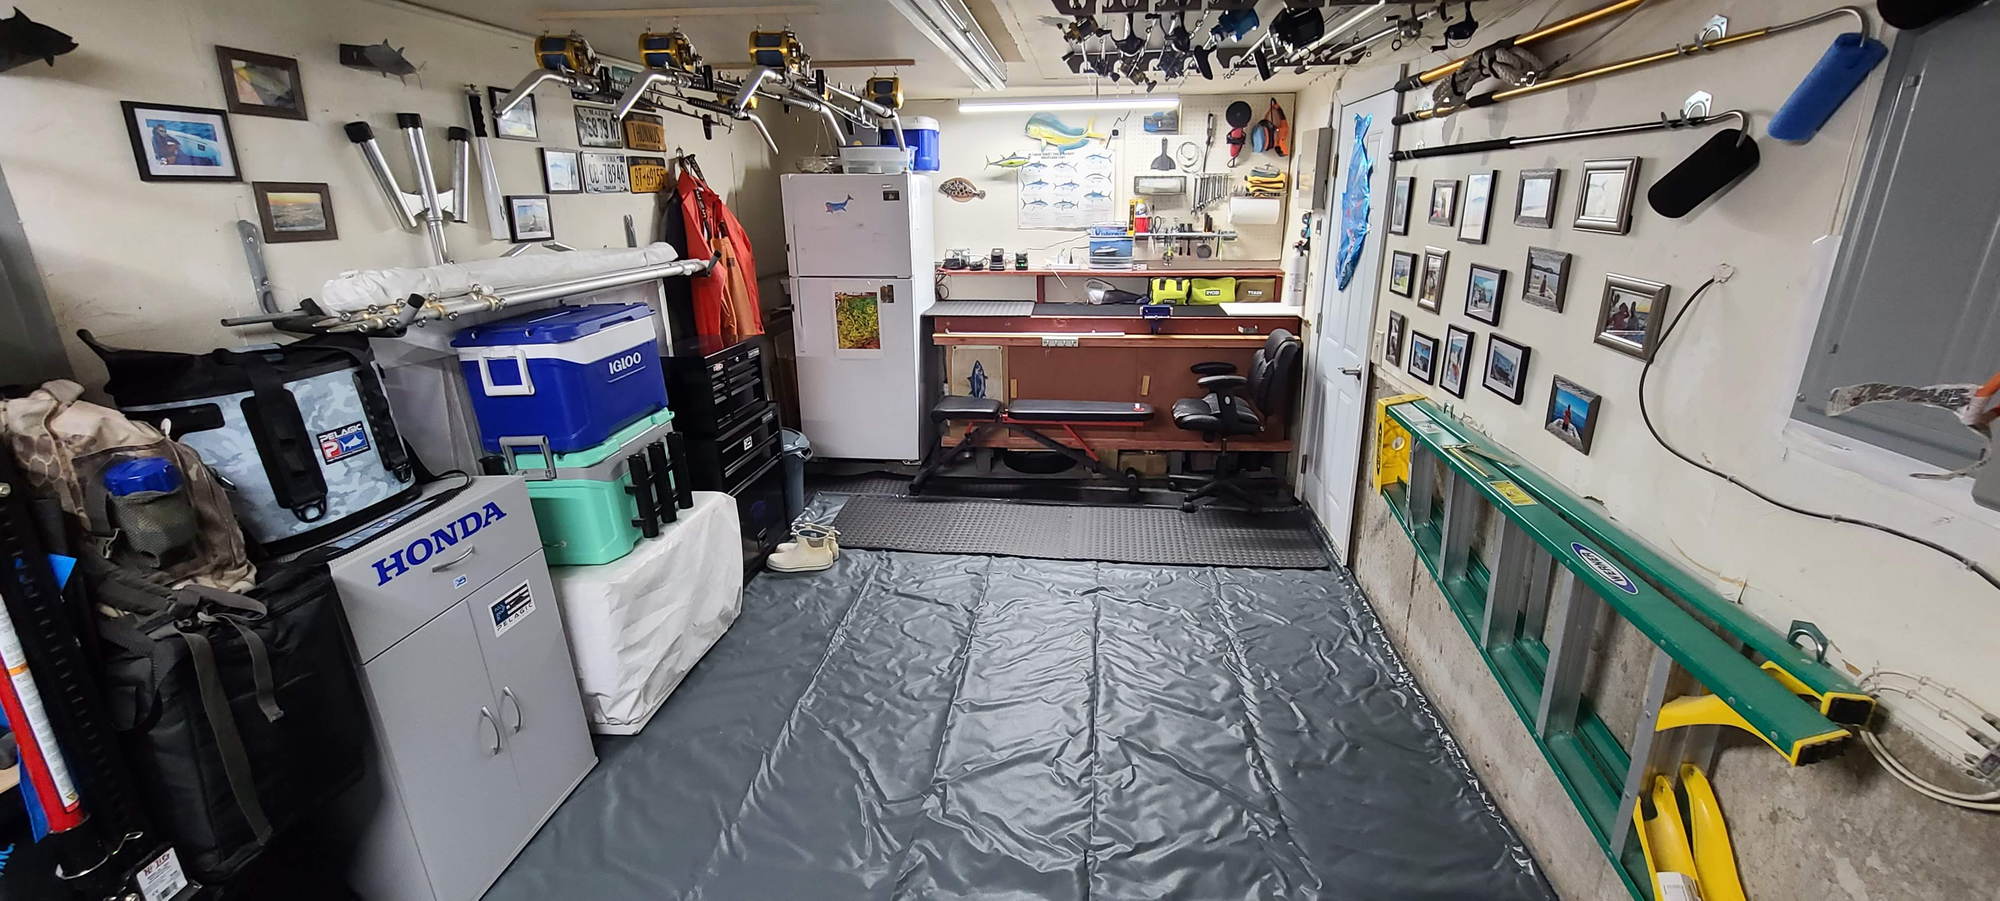 Garage Rod Storage - The Hull Truth - Boating and Fishing Forum